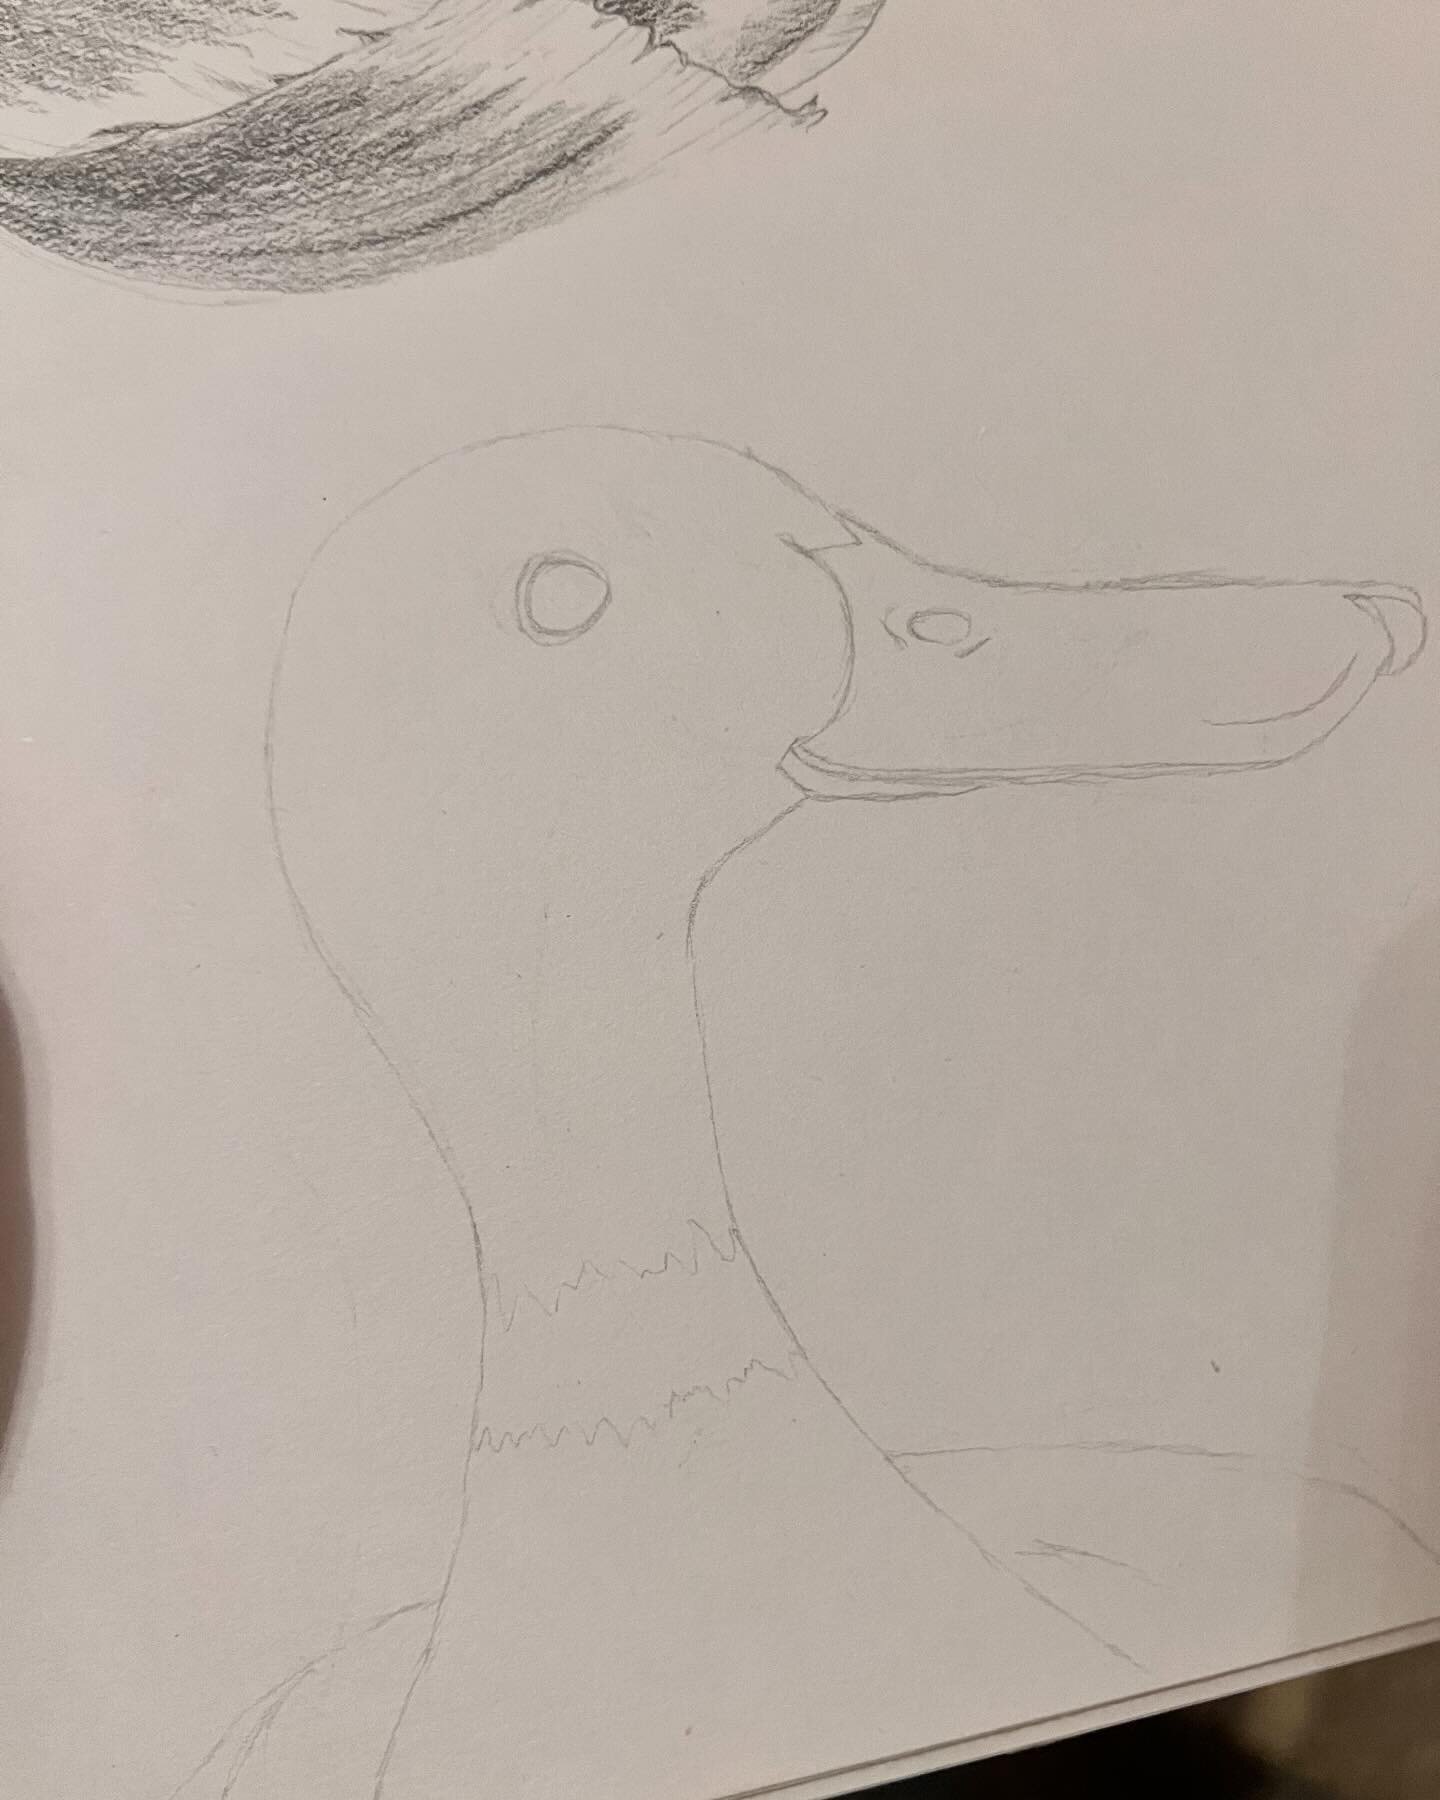 How it started to where it ended&hellip;
-
Here is a little duck 🦆 that I have done over the last couple of days - really getting the bug for some sketching atm however I am also dying to just get some paint out too - it&rsquo;s just far too cold in